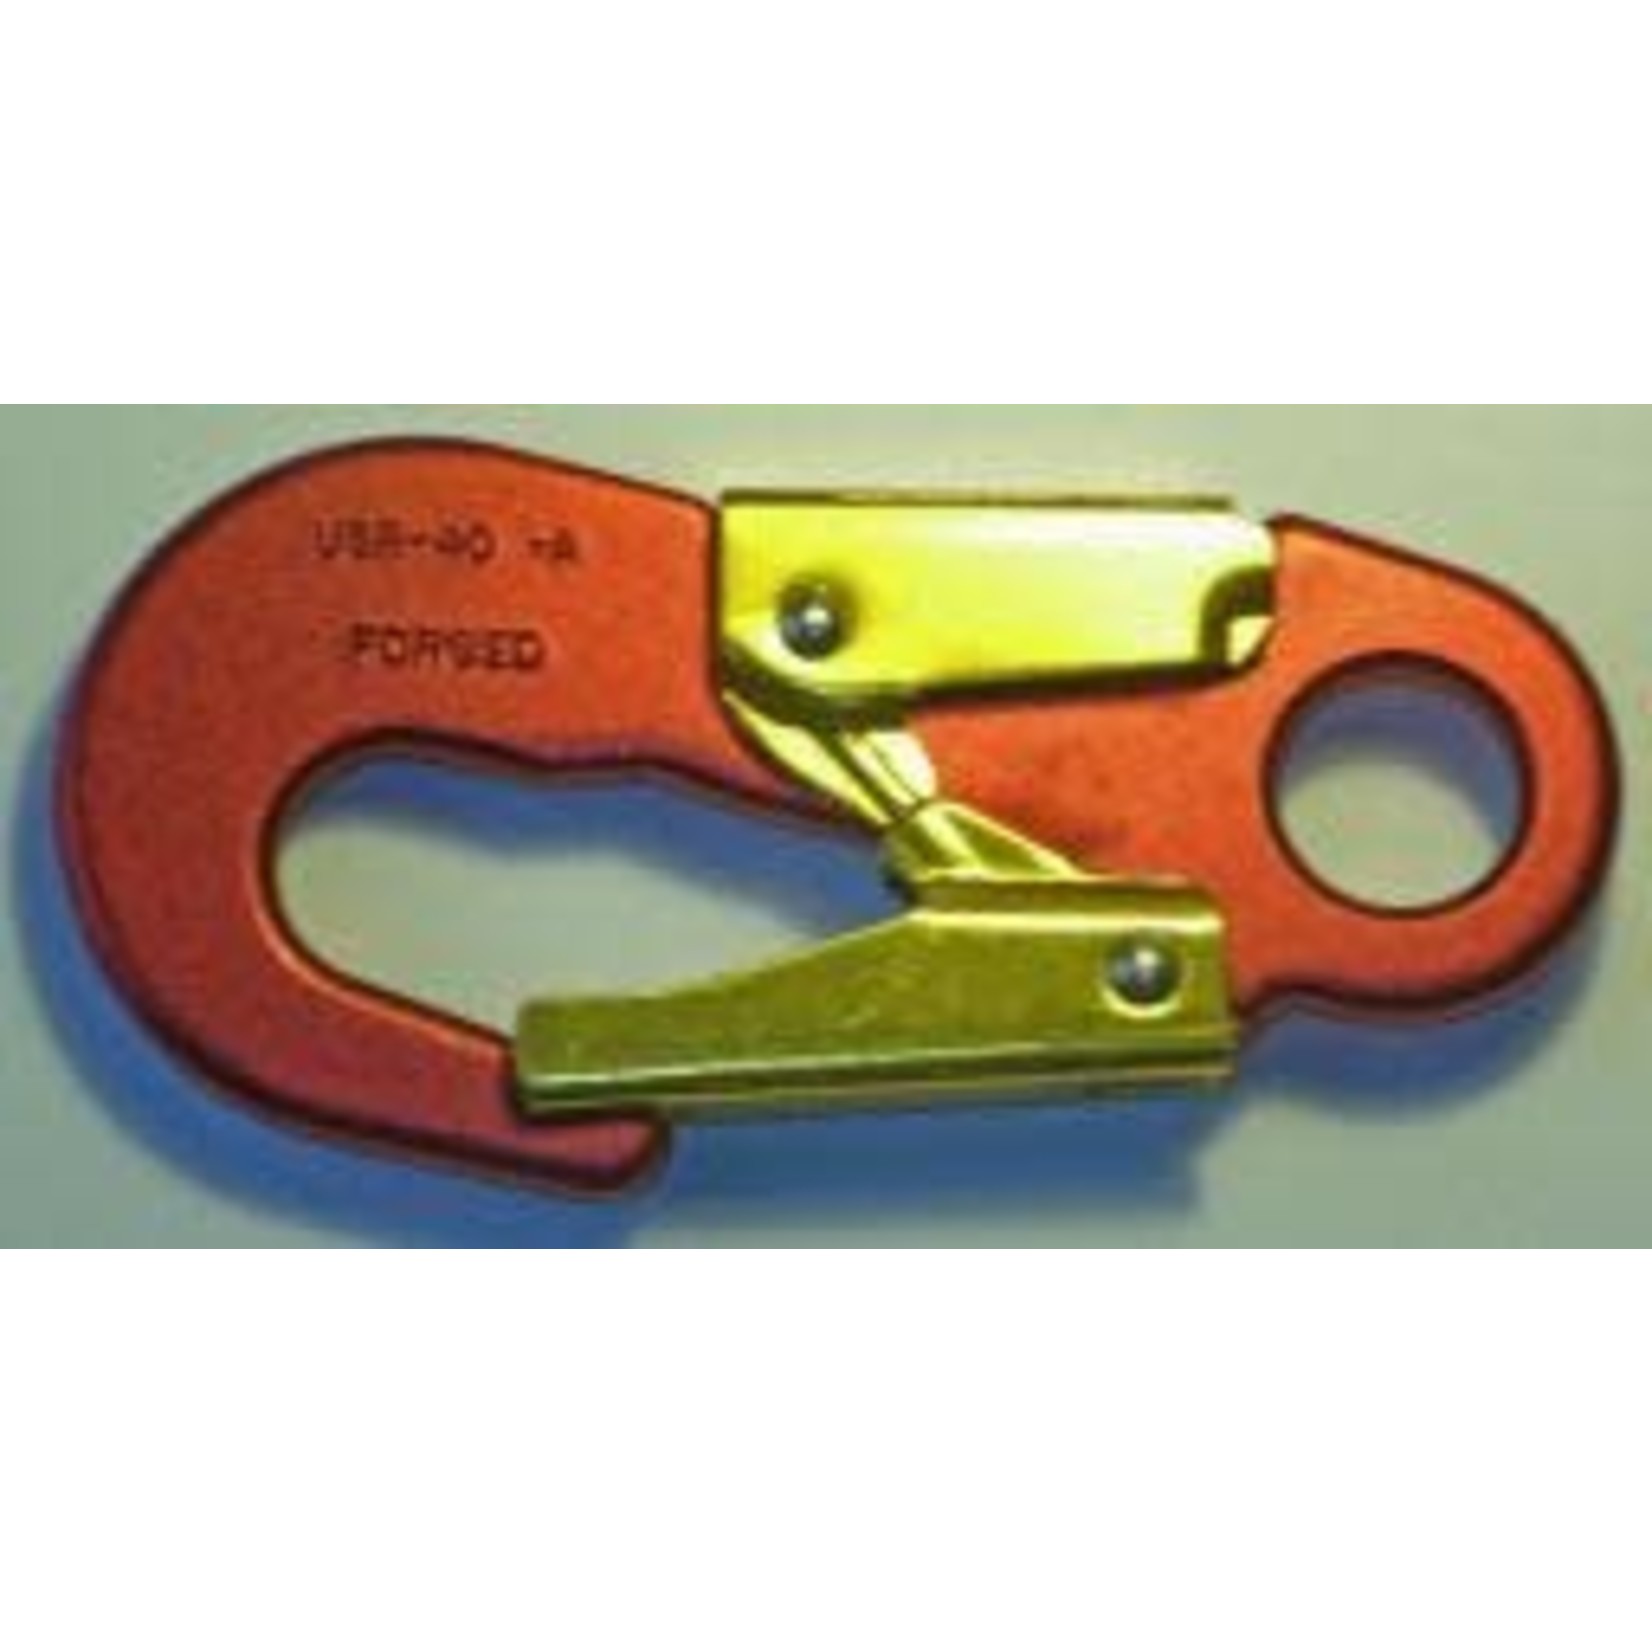 U.S. Rigging Snap, Red Baron Aluminum, Double Locking 31Kn Mbs Red Anodized